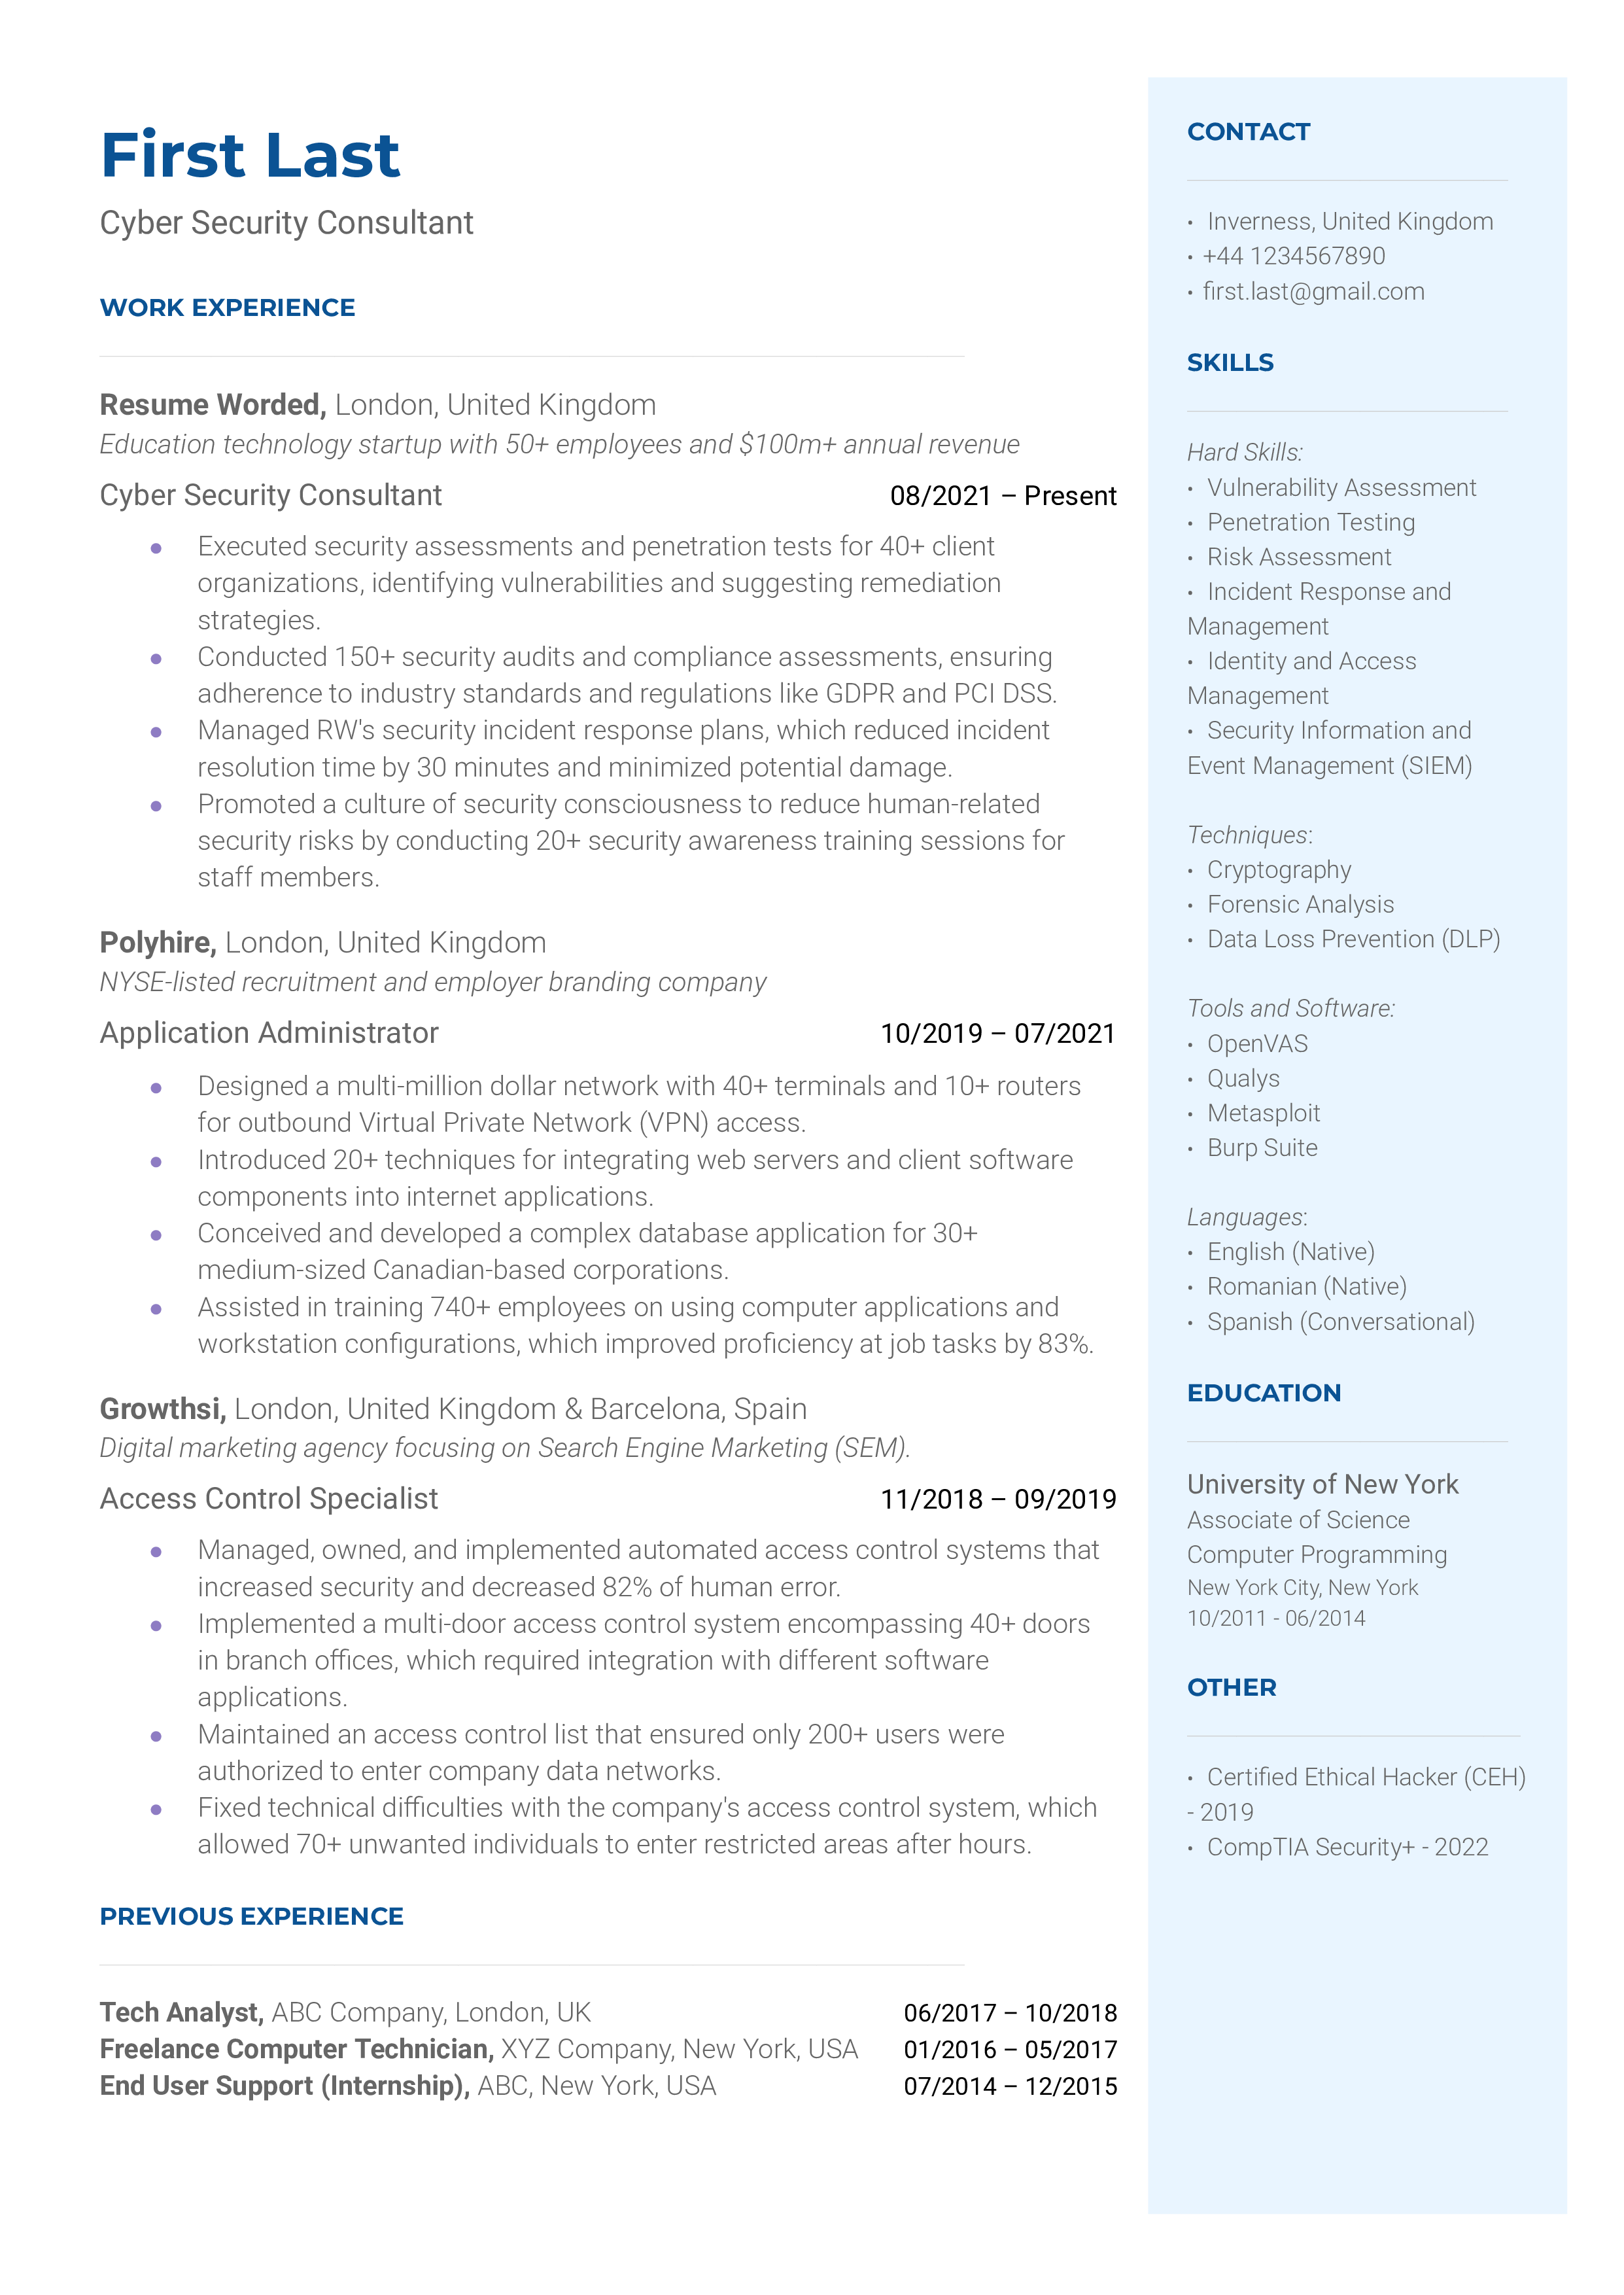 Cyber security consultant resume sample